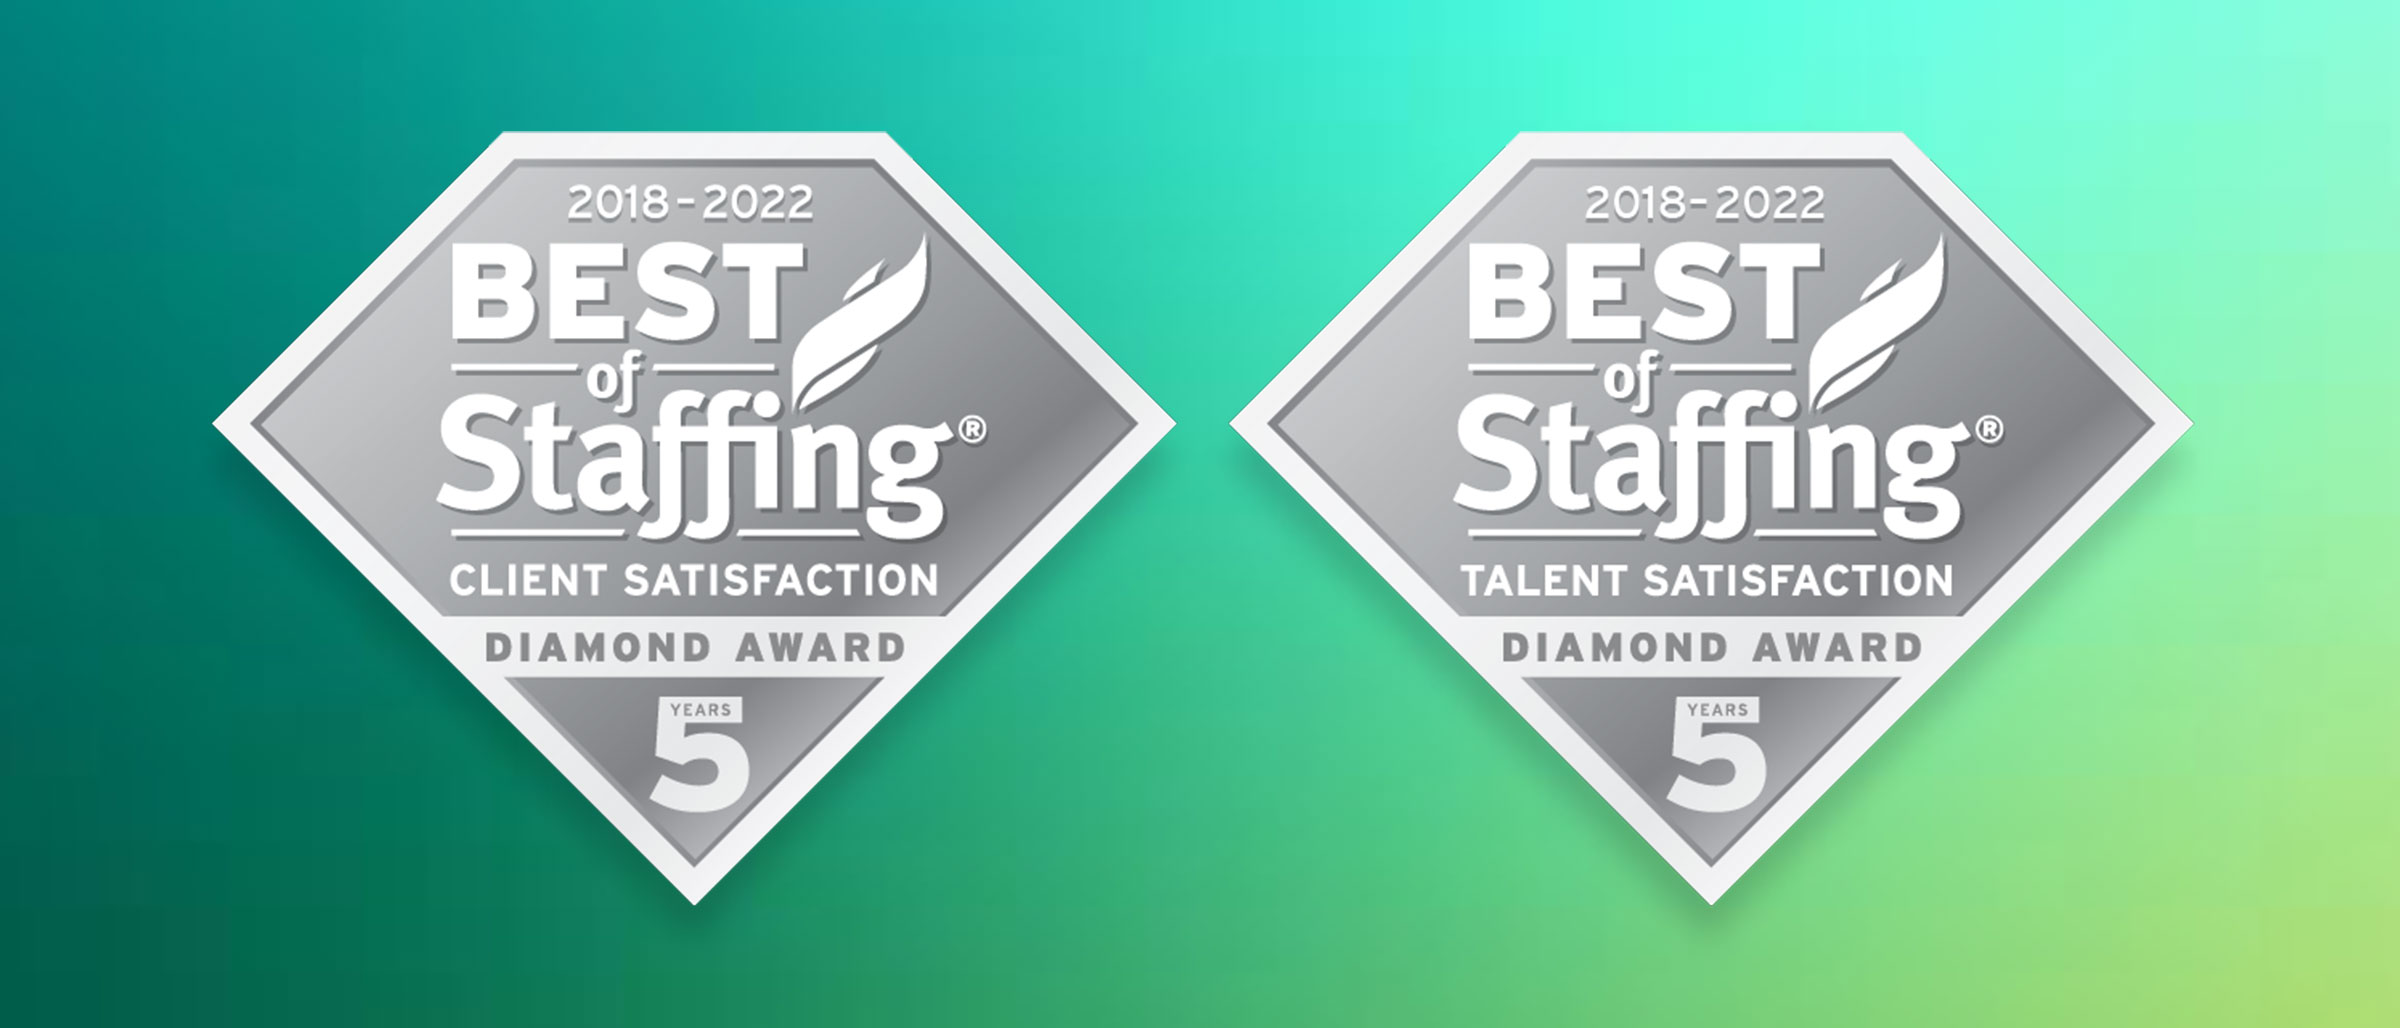 ClearlyRated’s 2022 Best of Staffing Client and Talent Diamond Awards for Service Excellence - Judge Group